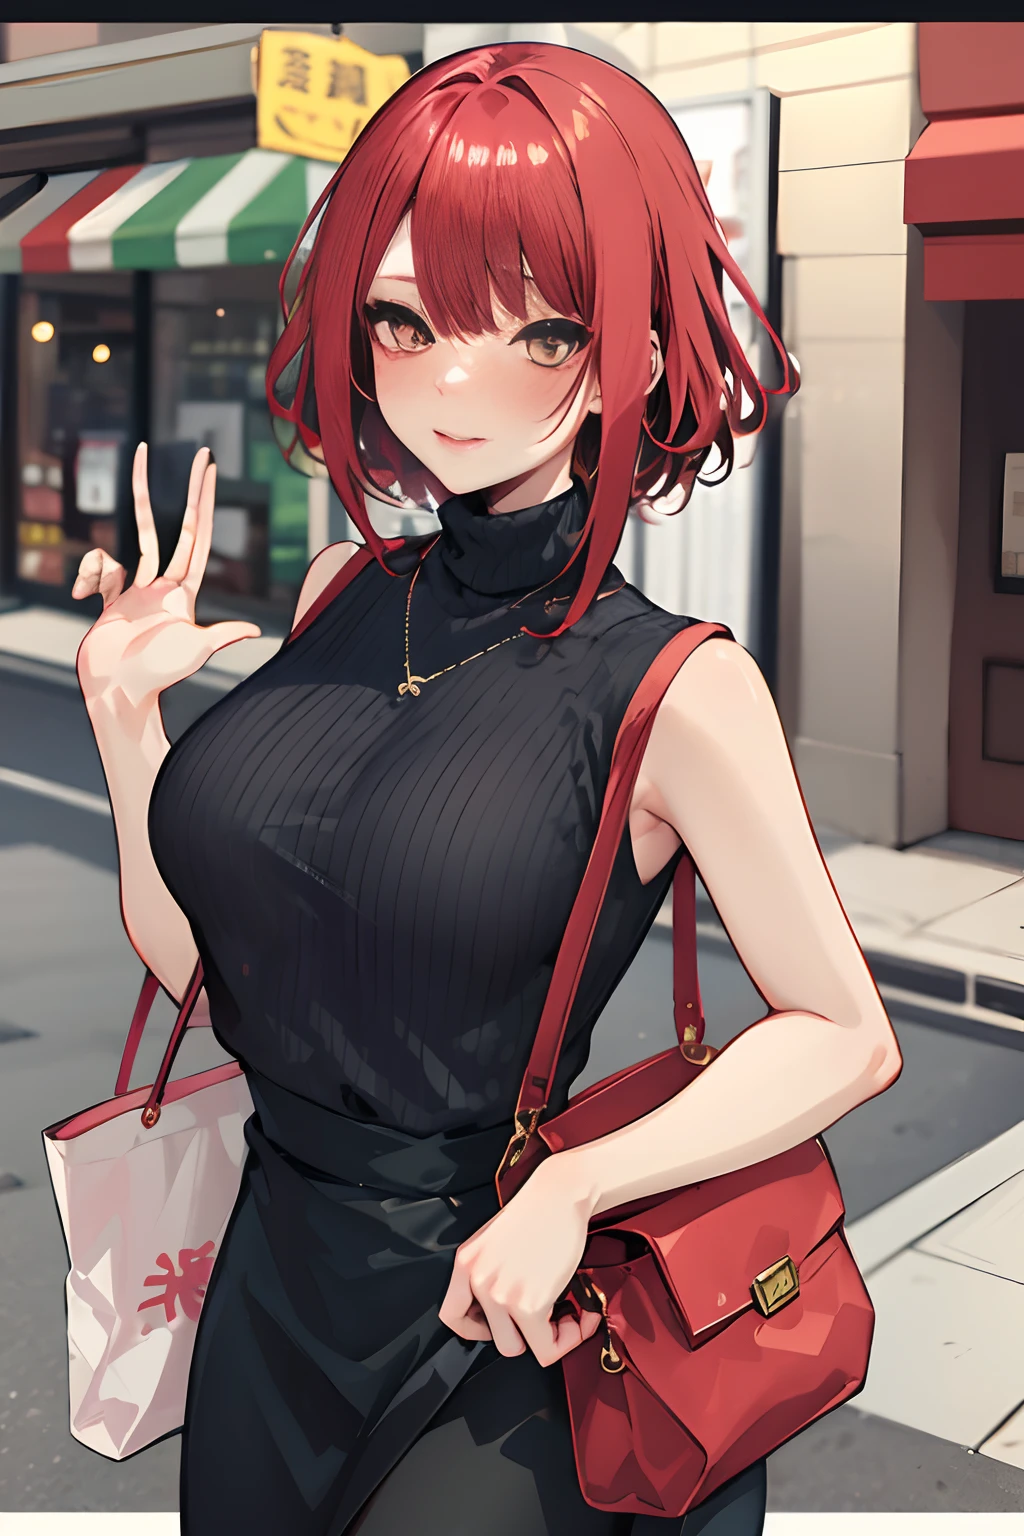 masutepiece, Best Quality, pixiv, Cowboy Shot, Red hair,
1girl in, breasts, blush, Sleeveless,Jewelry, Looking at Viewer, Skirt, Necklace, Solo, Bag, Sweaters, turtle neck, sleeveless turtleneck, Jacket, Sleeveless sweater, Long skirt, Medium Hair, Handbag